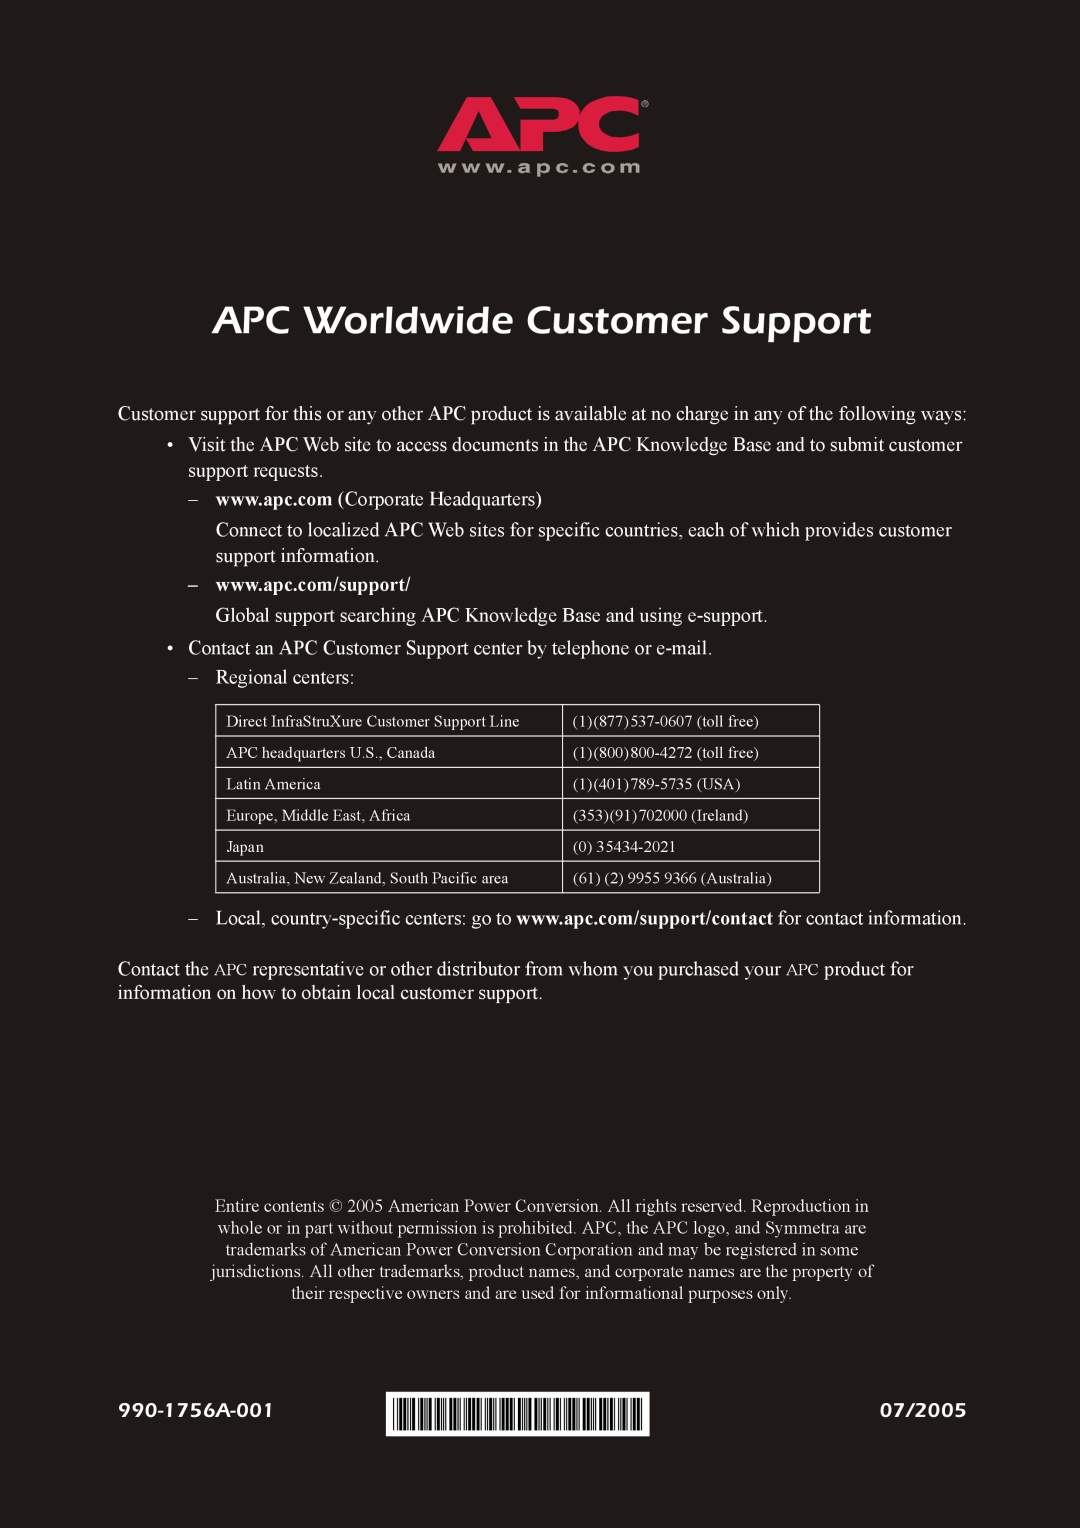 American Power Conversion Bypass Static manual 990-1756A-001, APC Worldwide Customer Support, 07/2005 